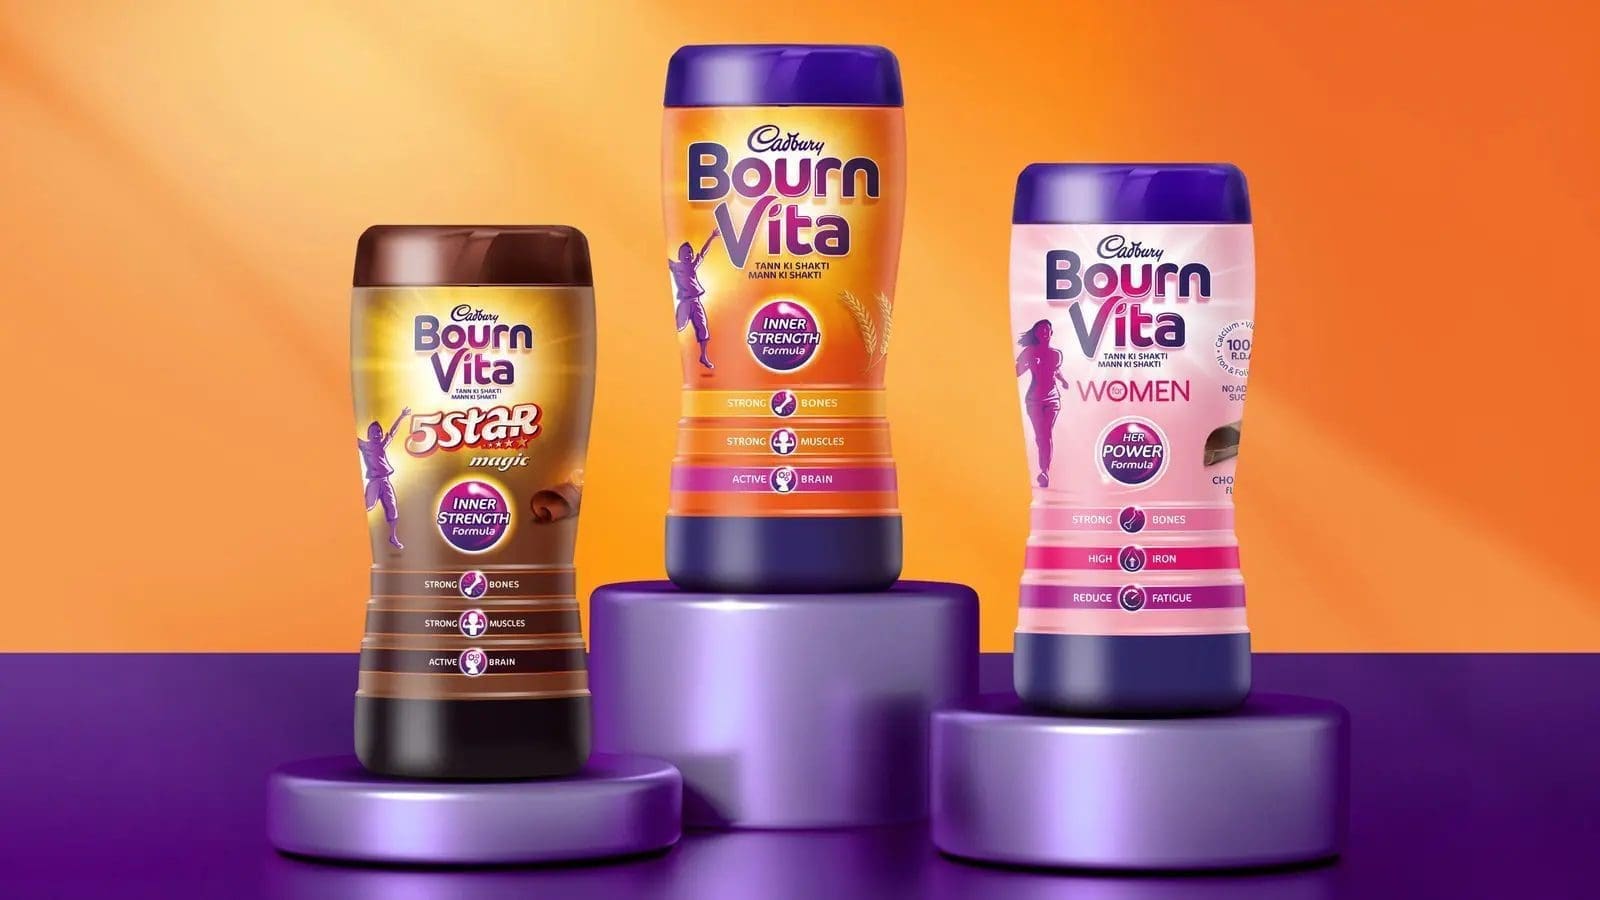 Mondelez asked to redesign, reformulate Bournvita in India over misleading information